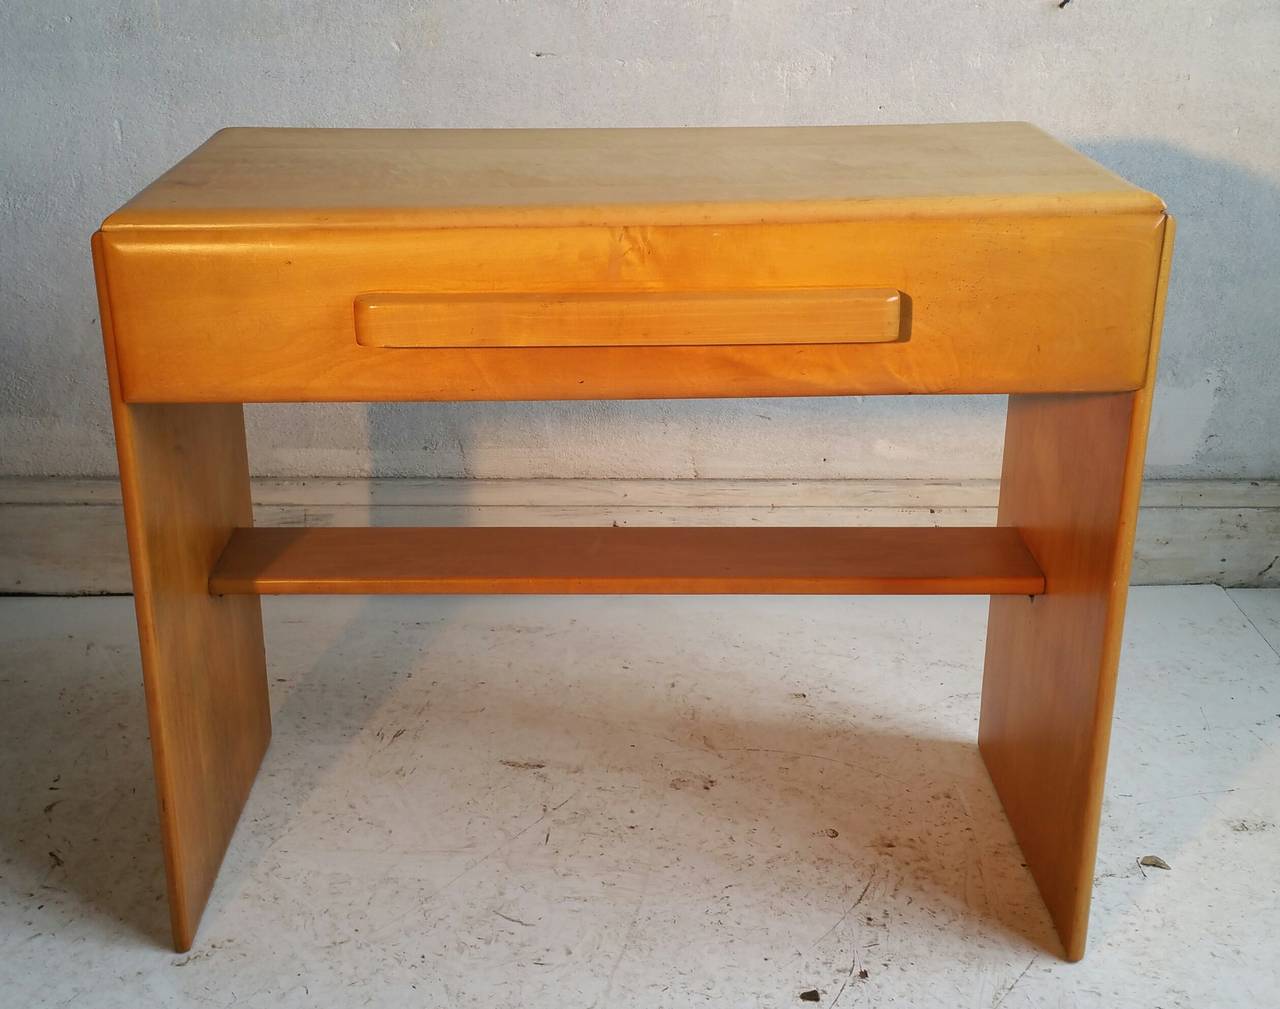 Great little writing desk manufactured by Conant-Ball,,designed by Russel Wright,, Solid birch,, wonderful classic blond patina,,Minimal,Sleek, simple design